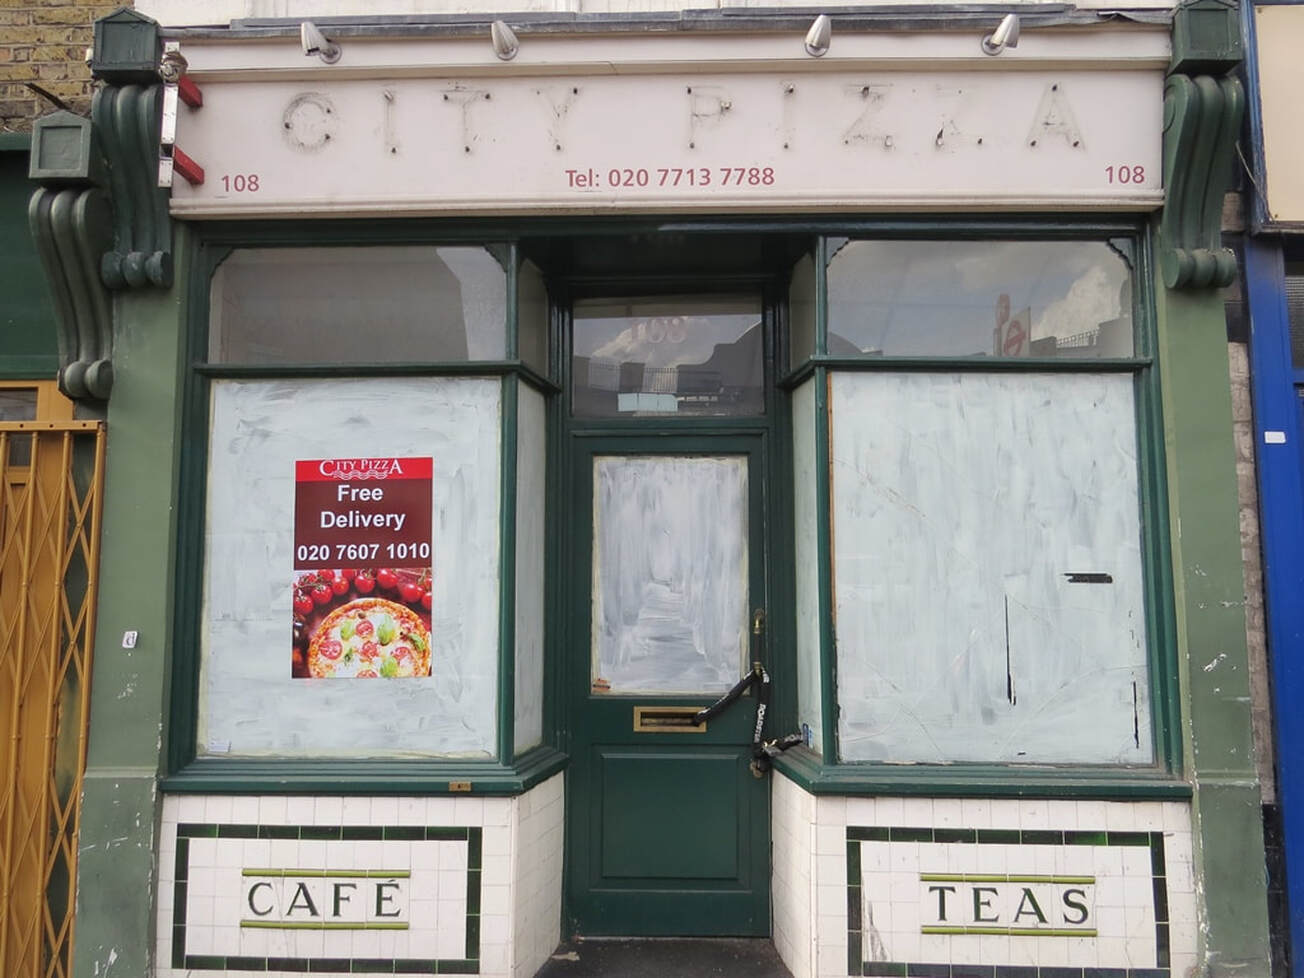 derelict cafe with ceramic white tiles with green lettering on Pentonville Road in Islington, London